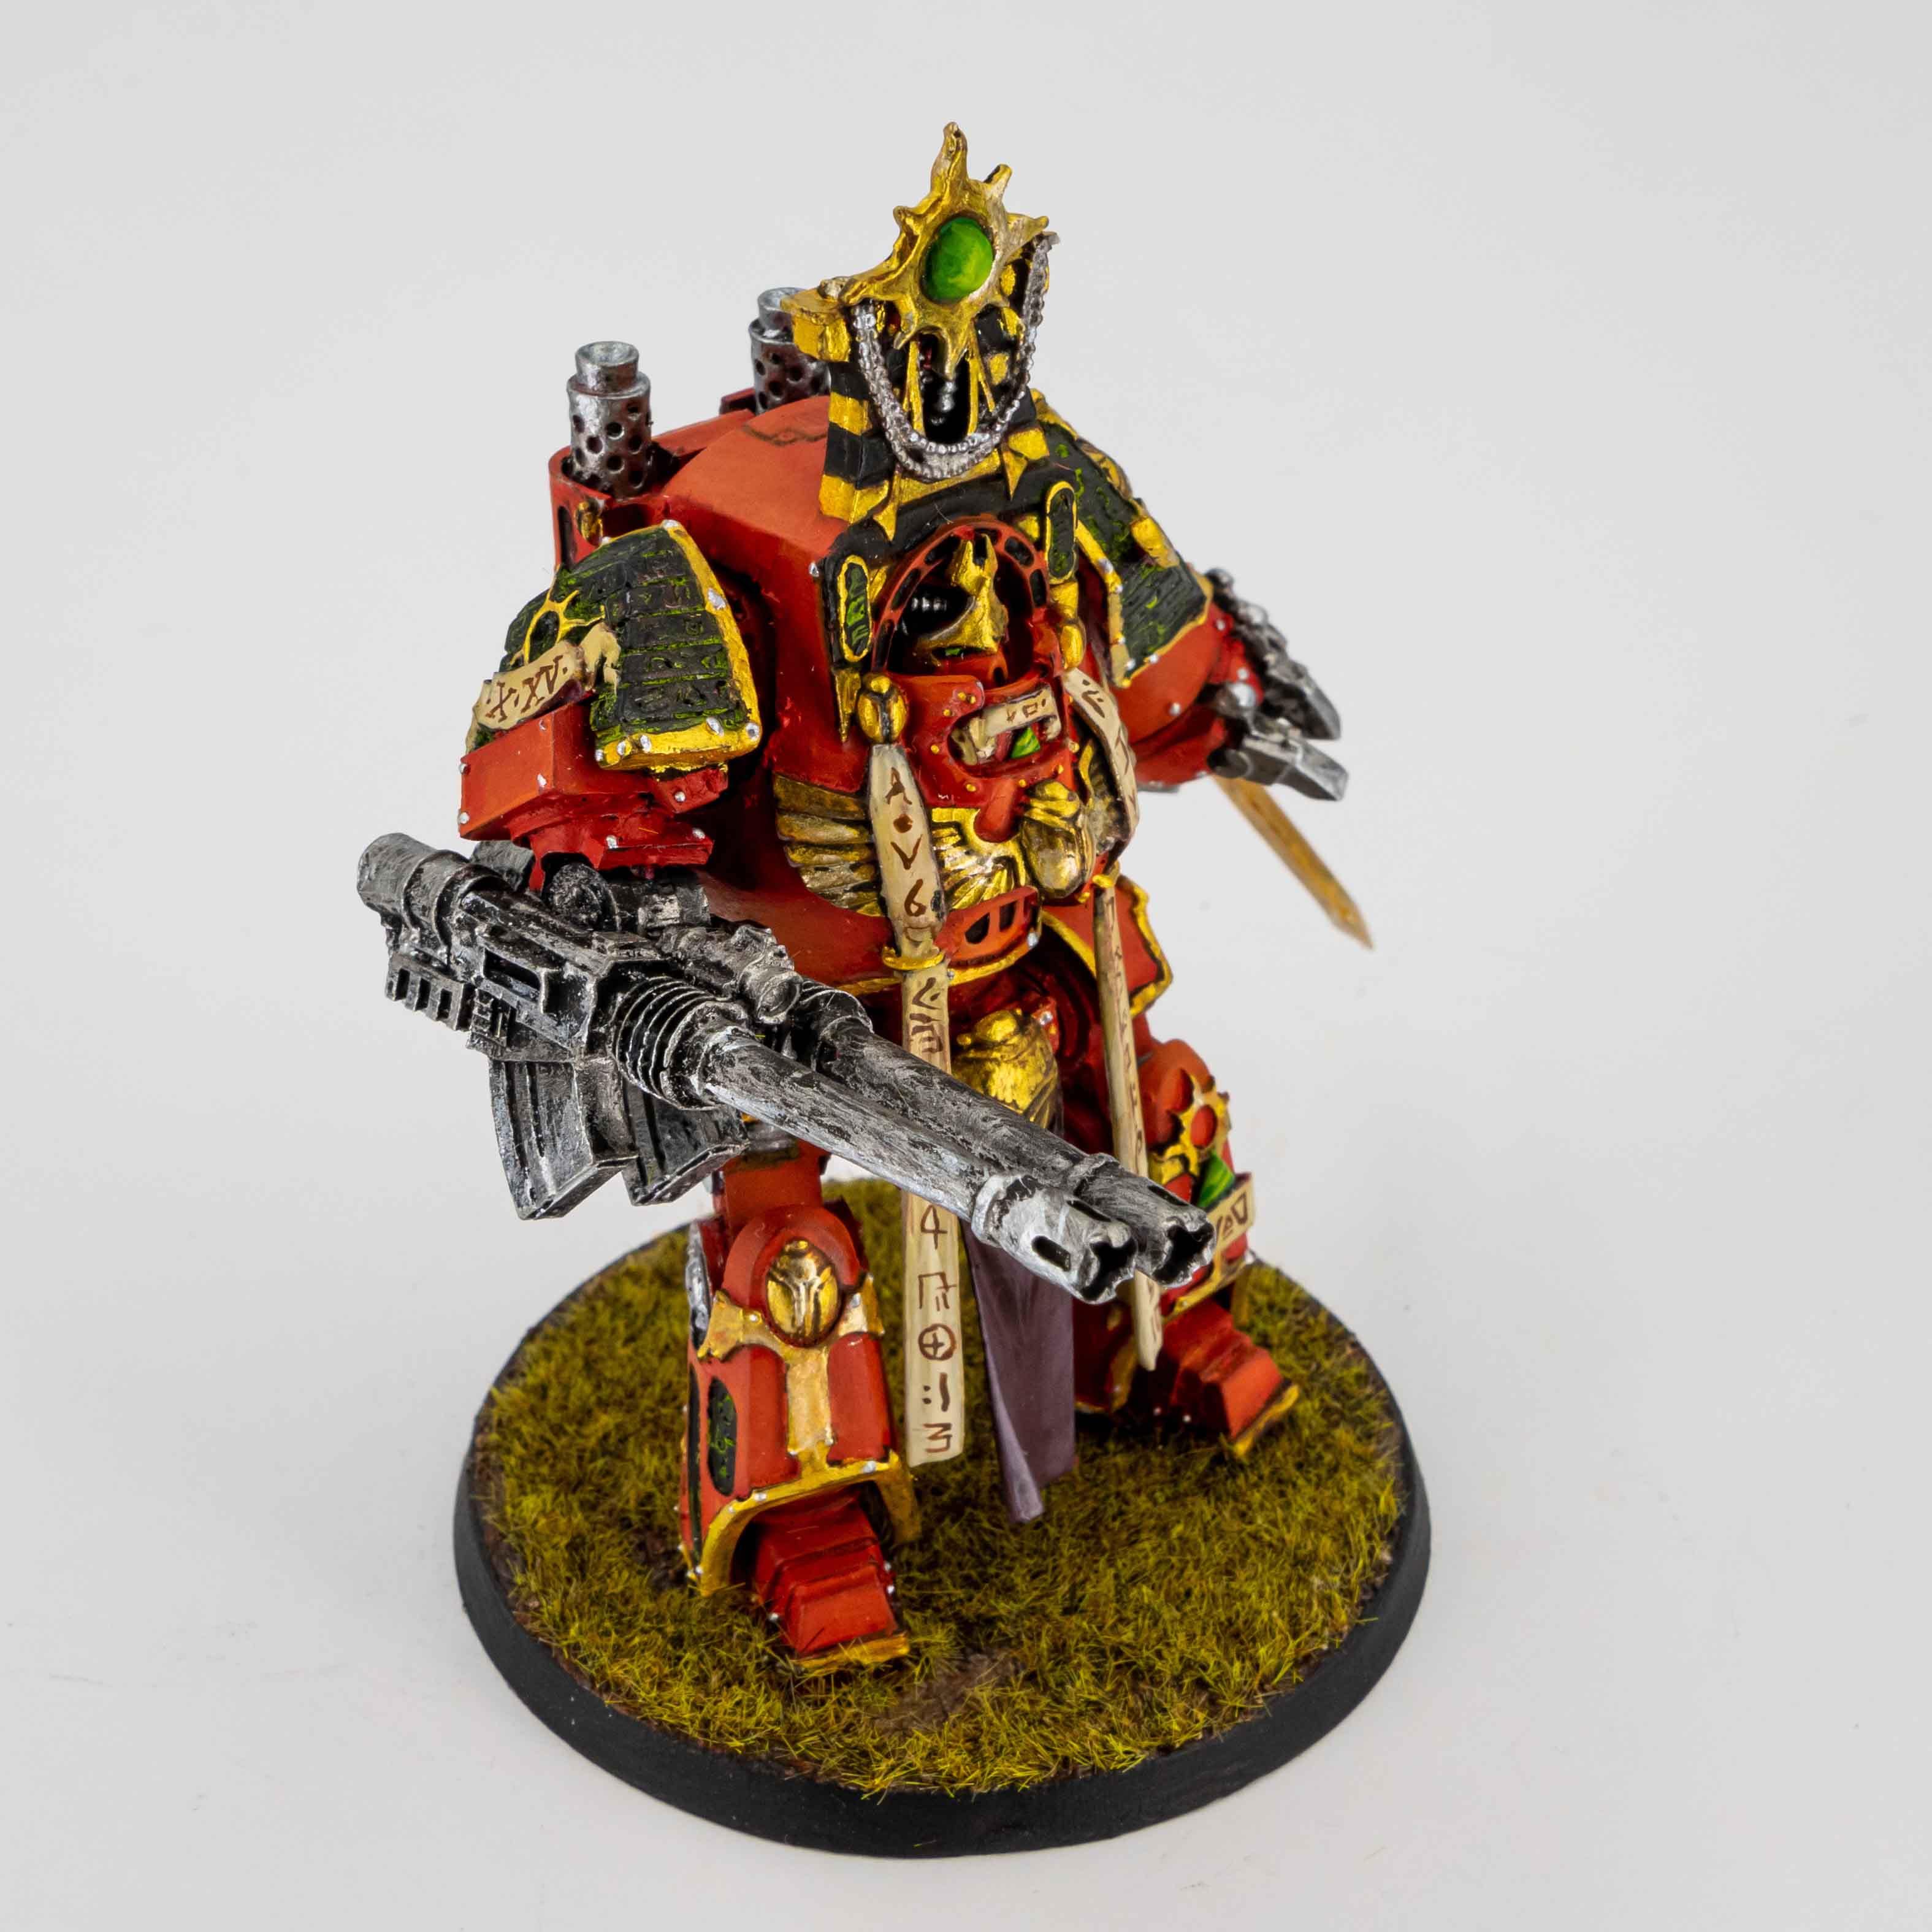 Thousand Sons Dreadnought by ElCasiegno on DeviantArt